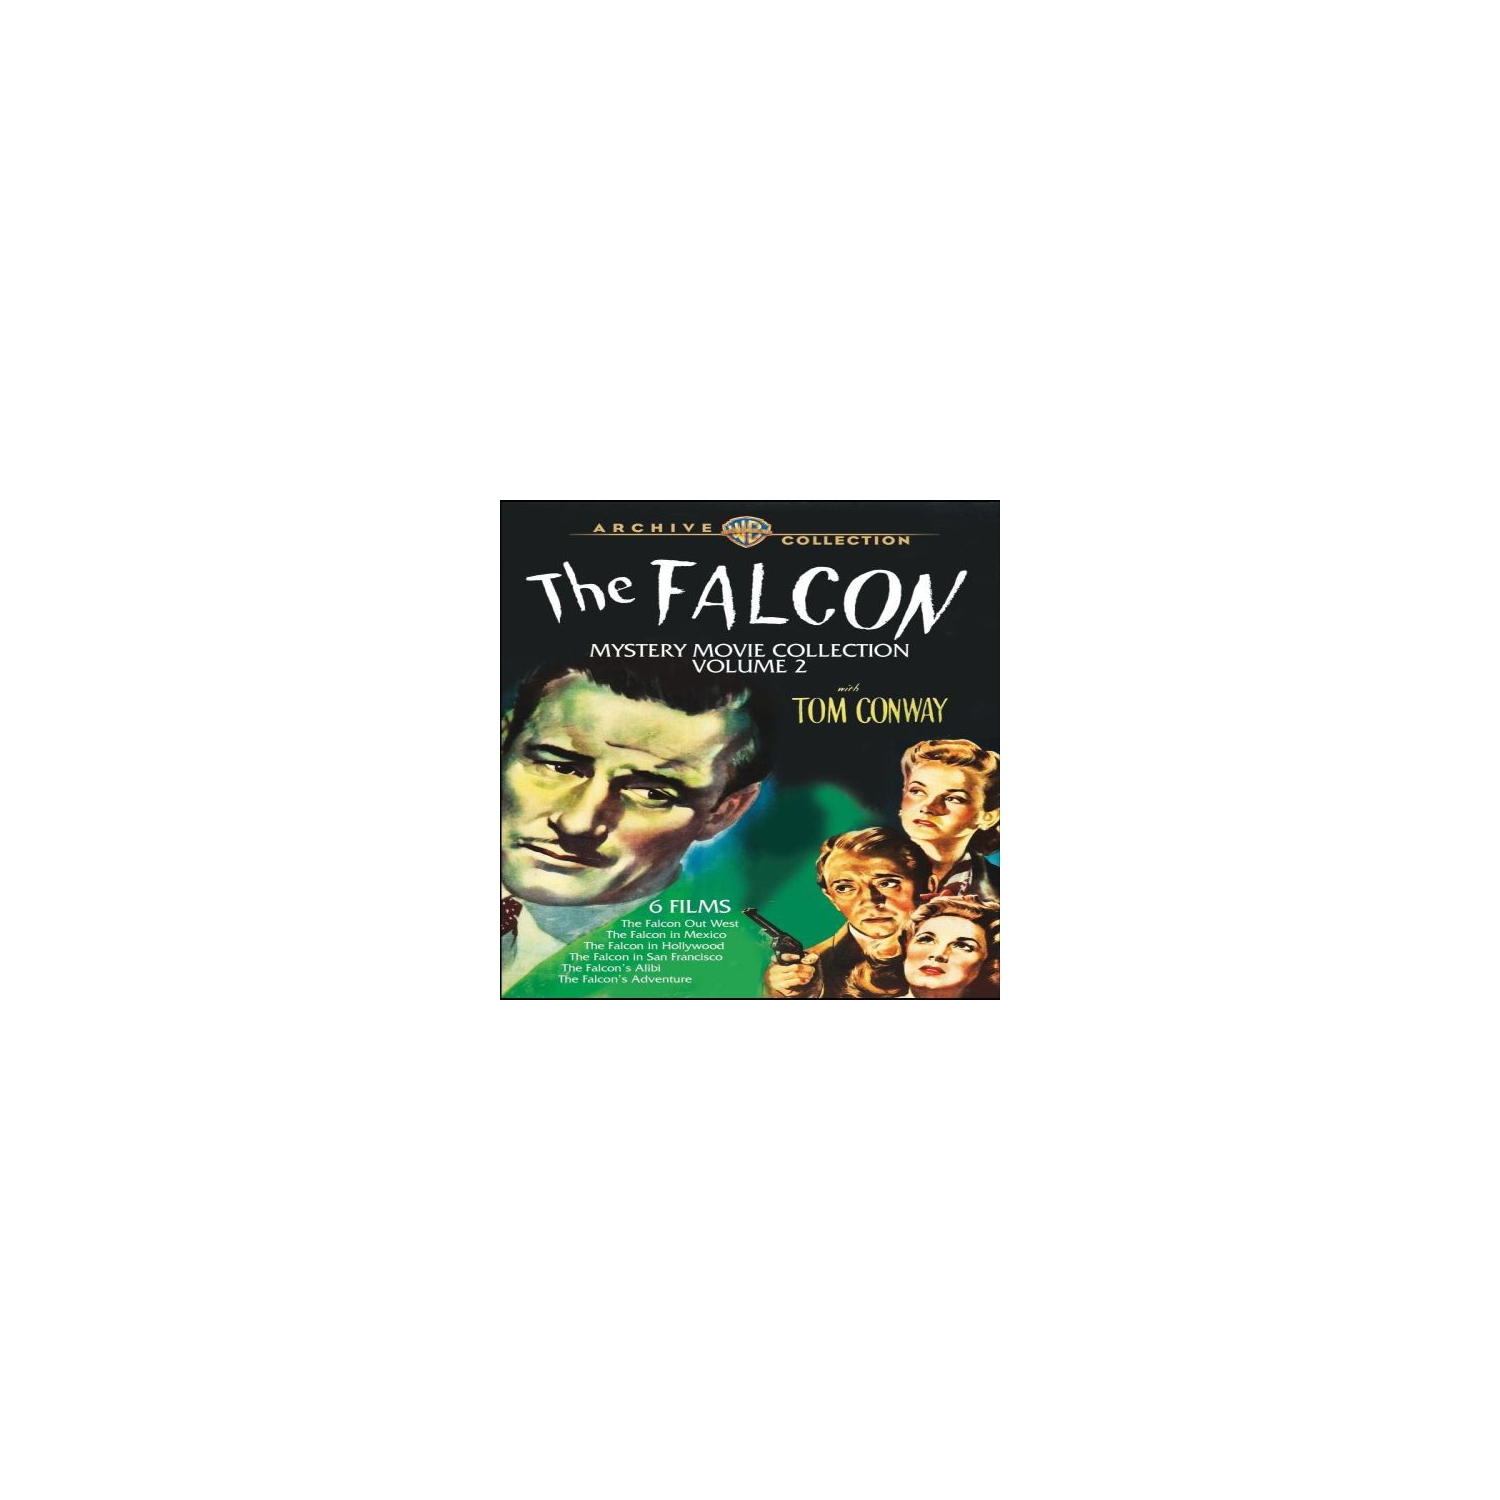 Warner Bros 883316719329 The Falcon Mystery Movie Collection Volume 2 - DVD